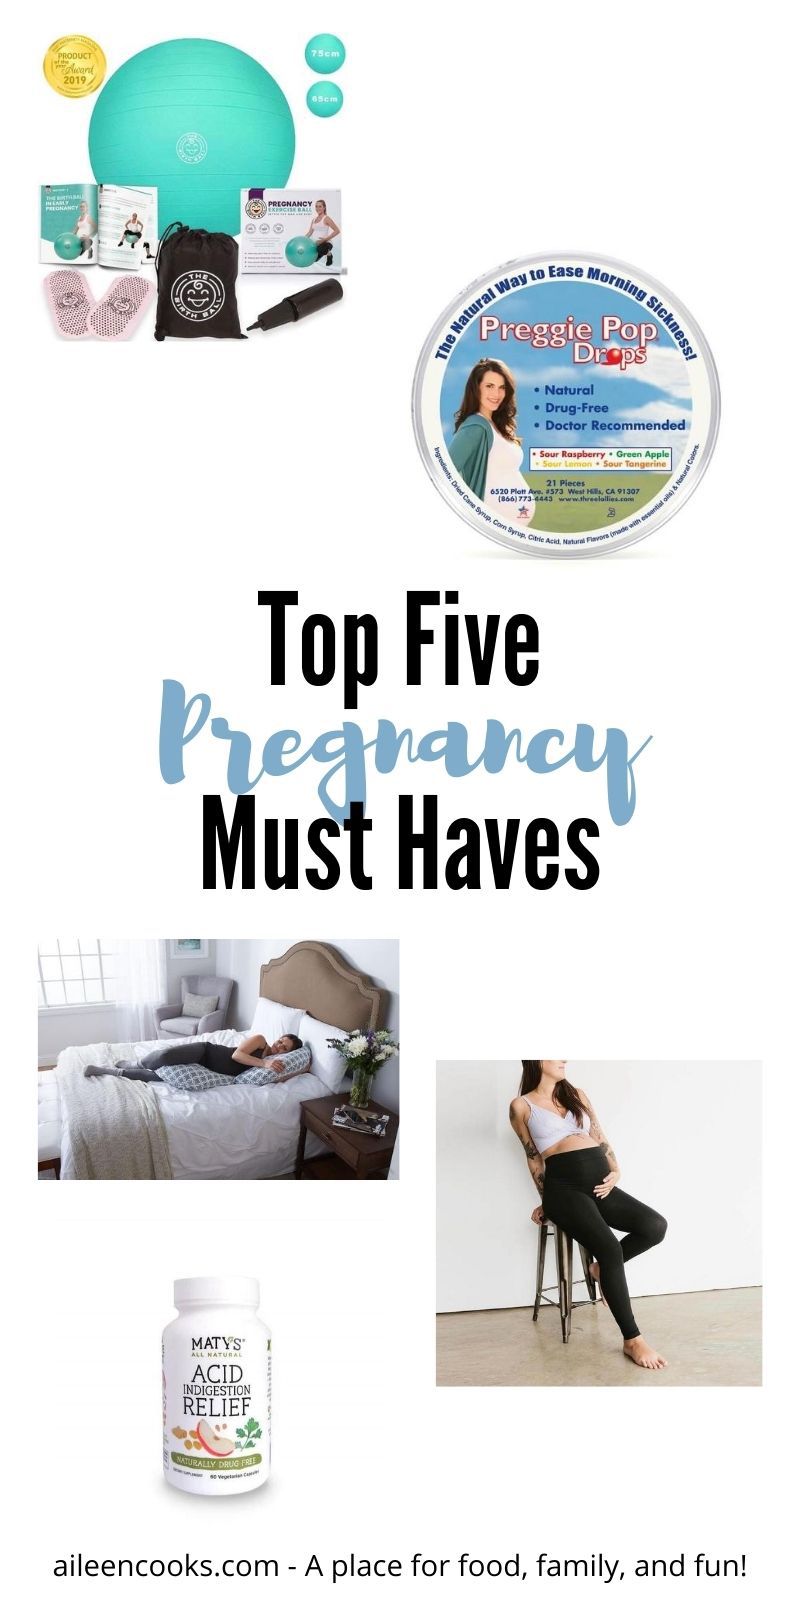 Collage photo of pregnancy products with the words "top five pregnancy must haves"